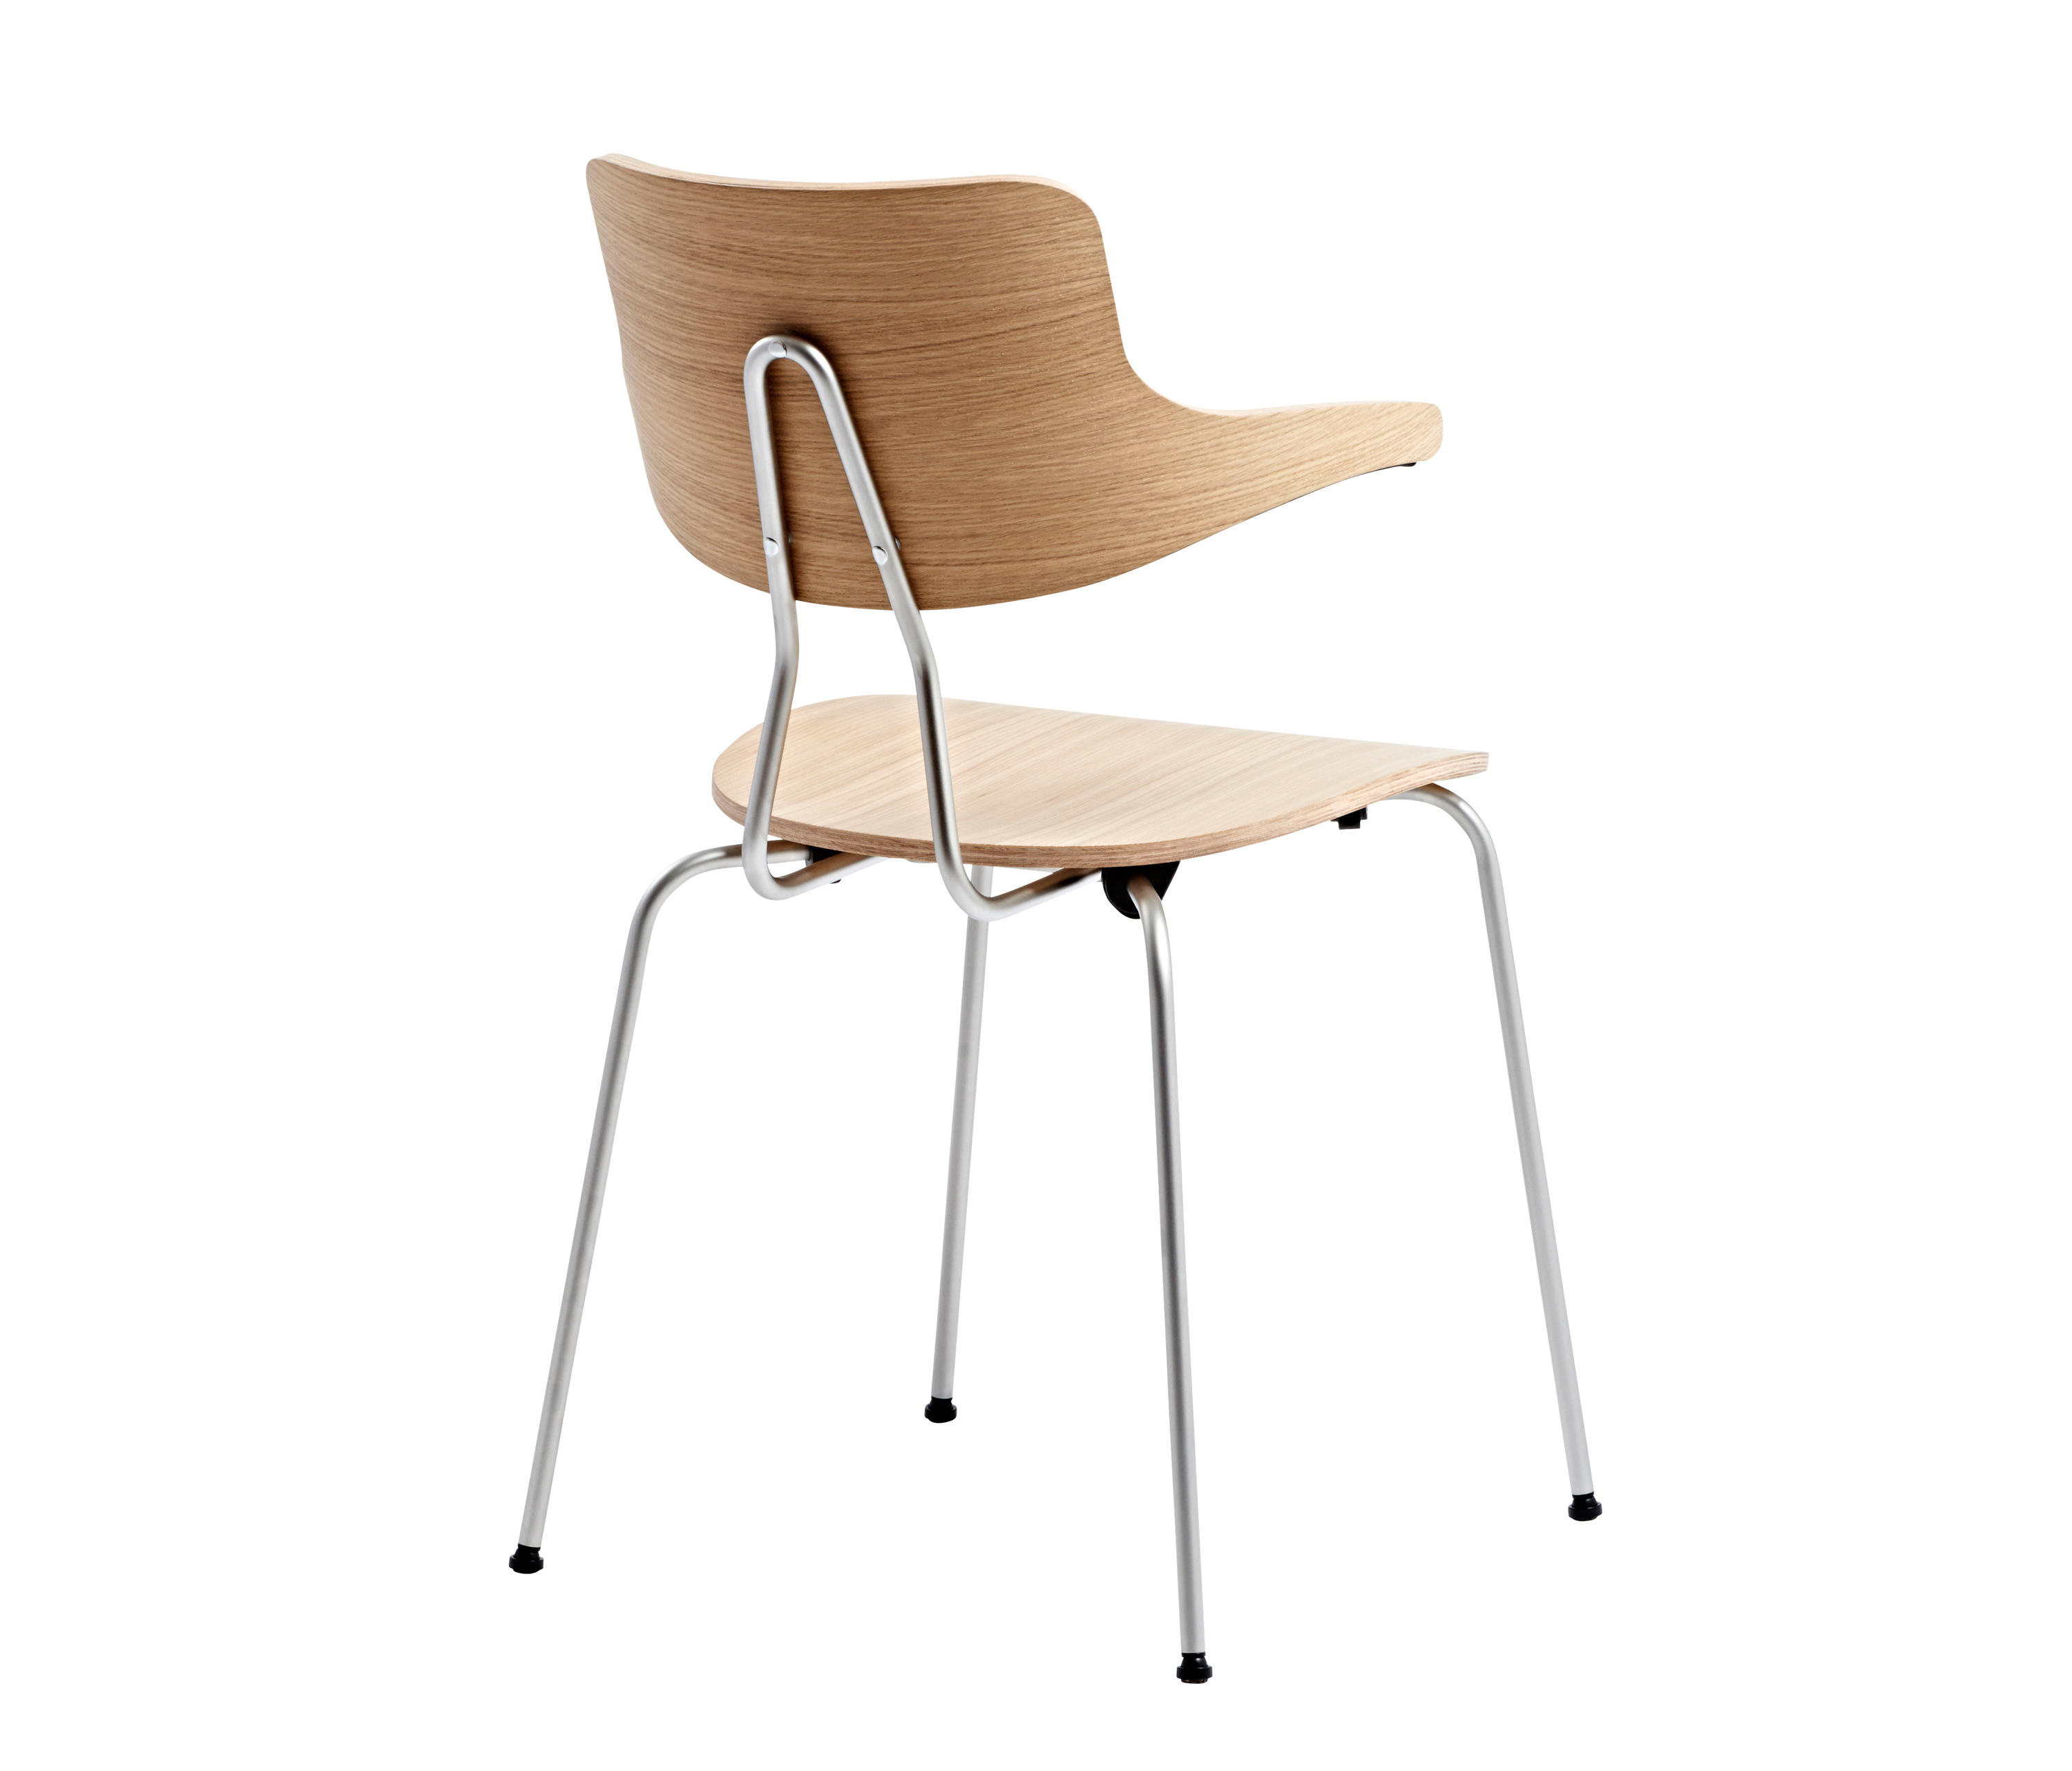 VL118 - Chairs from Vermund | Architonic